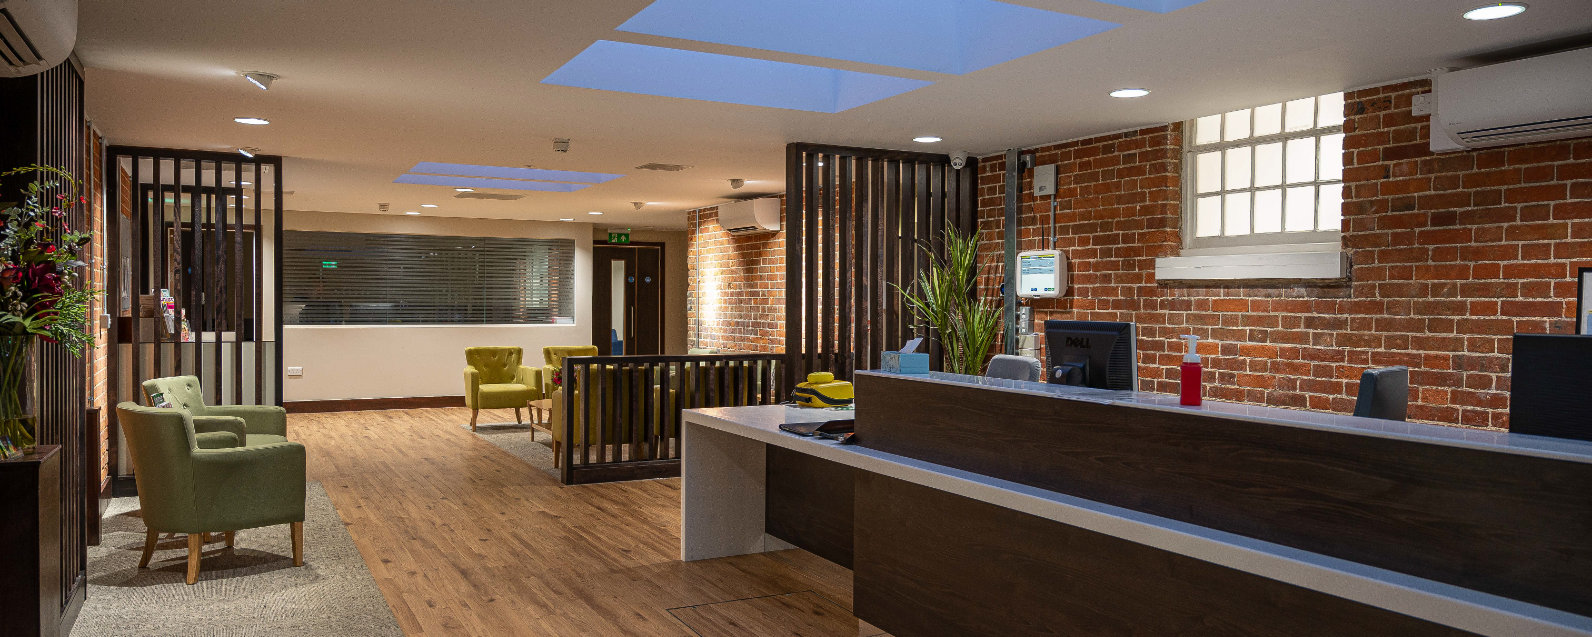 LSI-Architects-The-Global-Clinic-Norwich